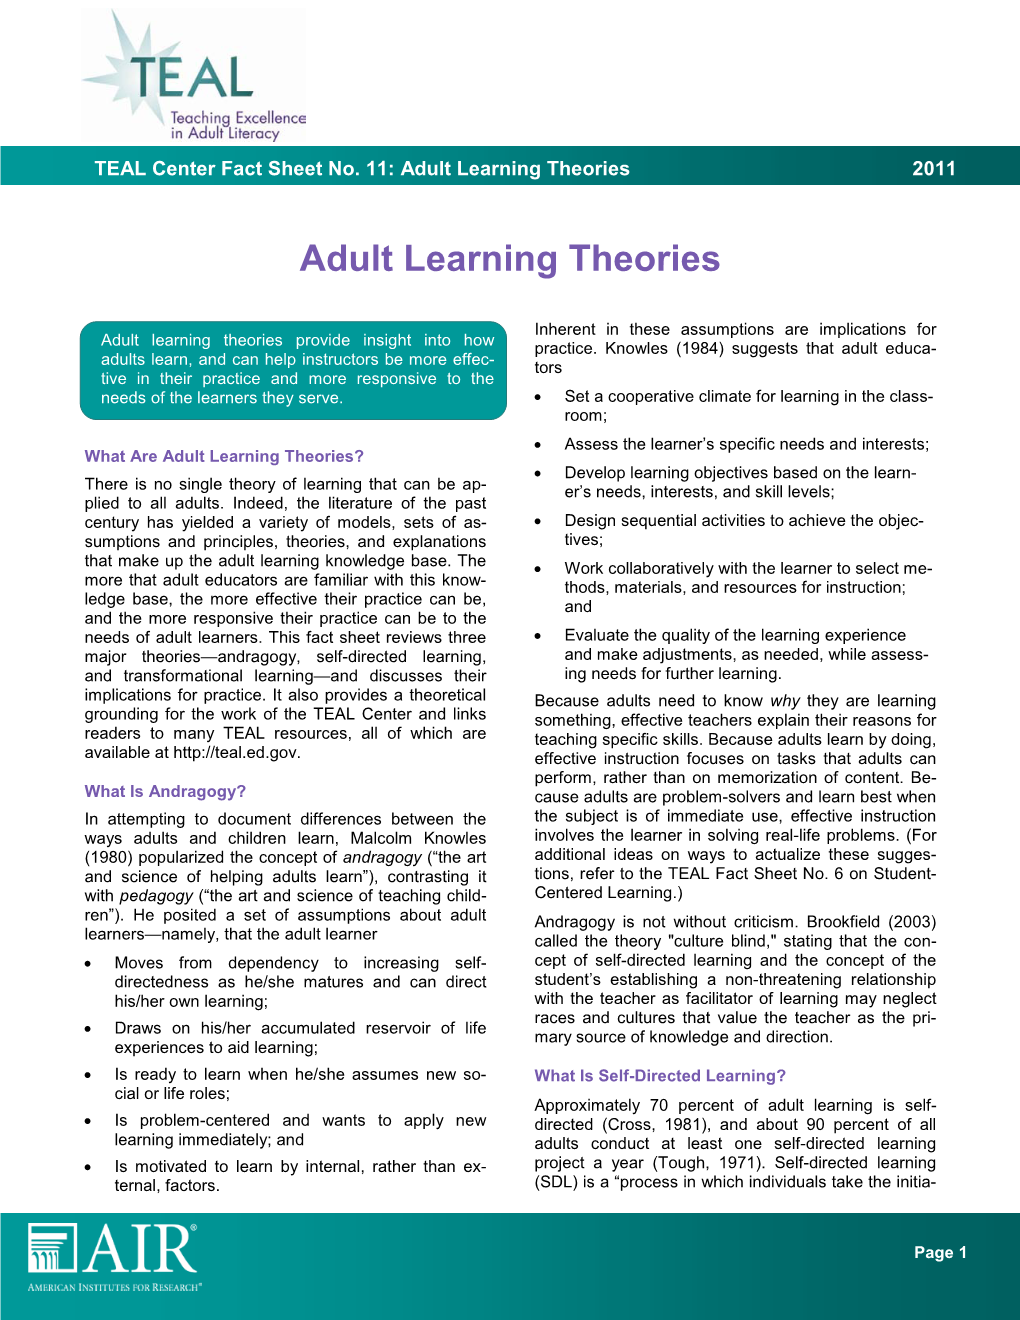 Adult Learning Theories 2011